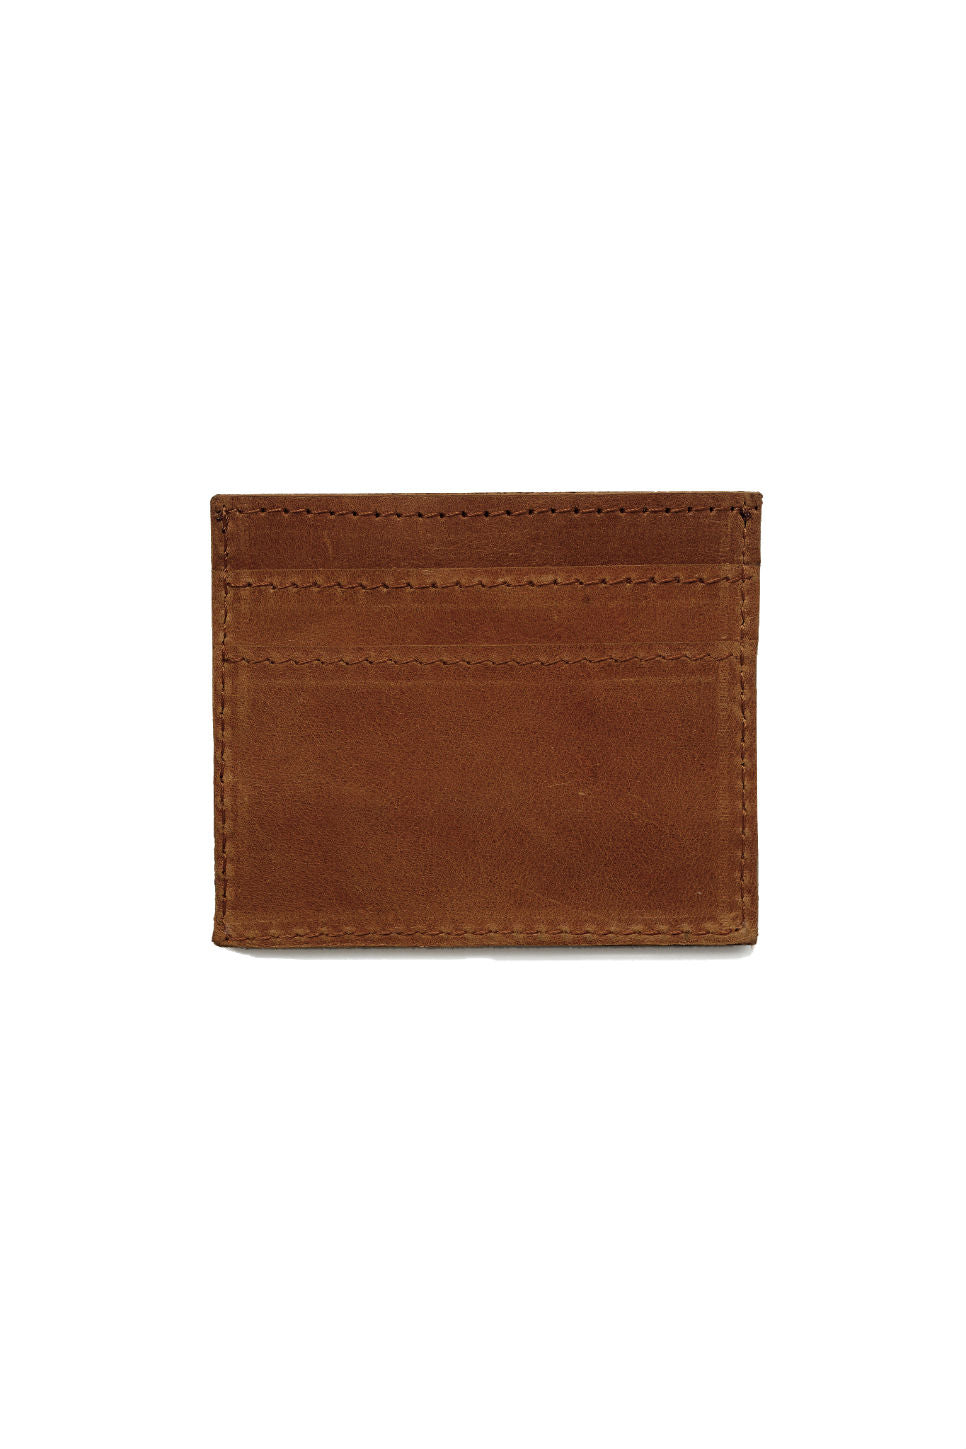 Able - Alem Wallet - Whiskey